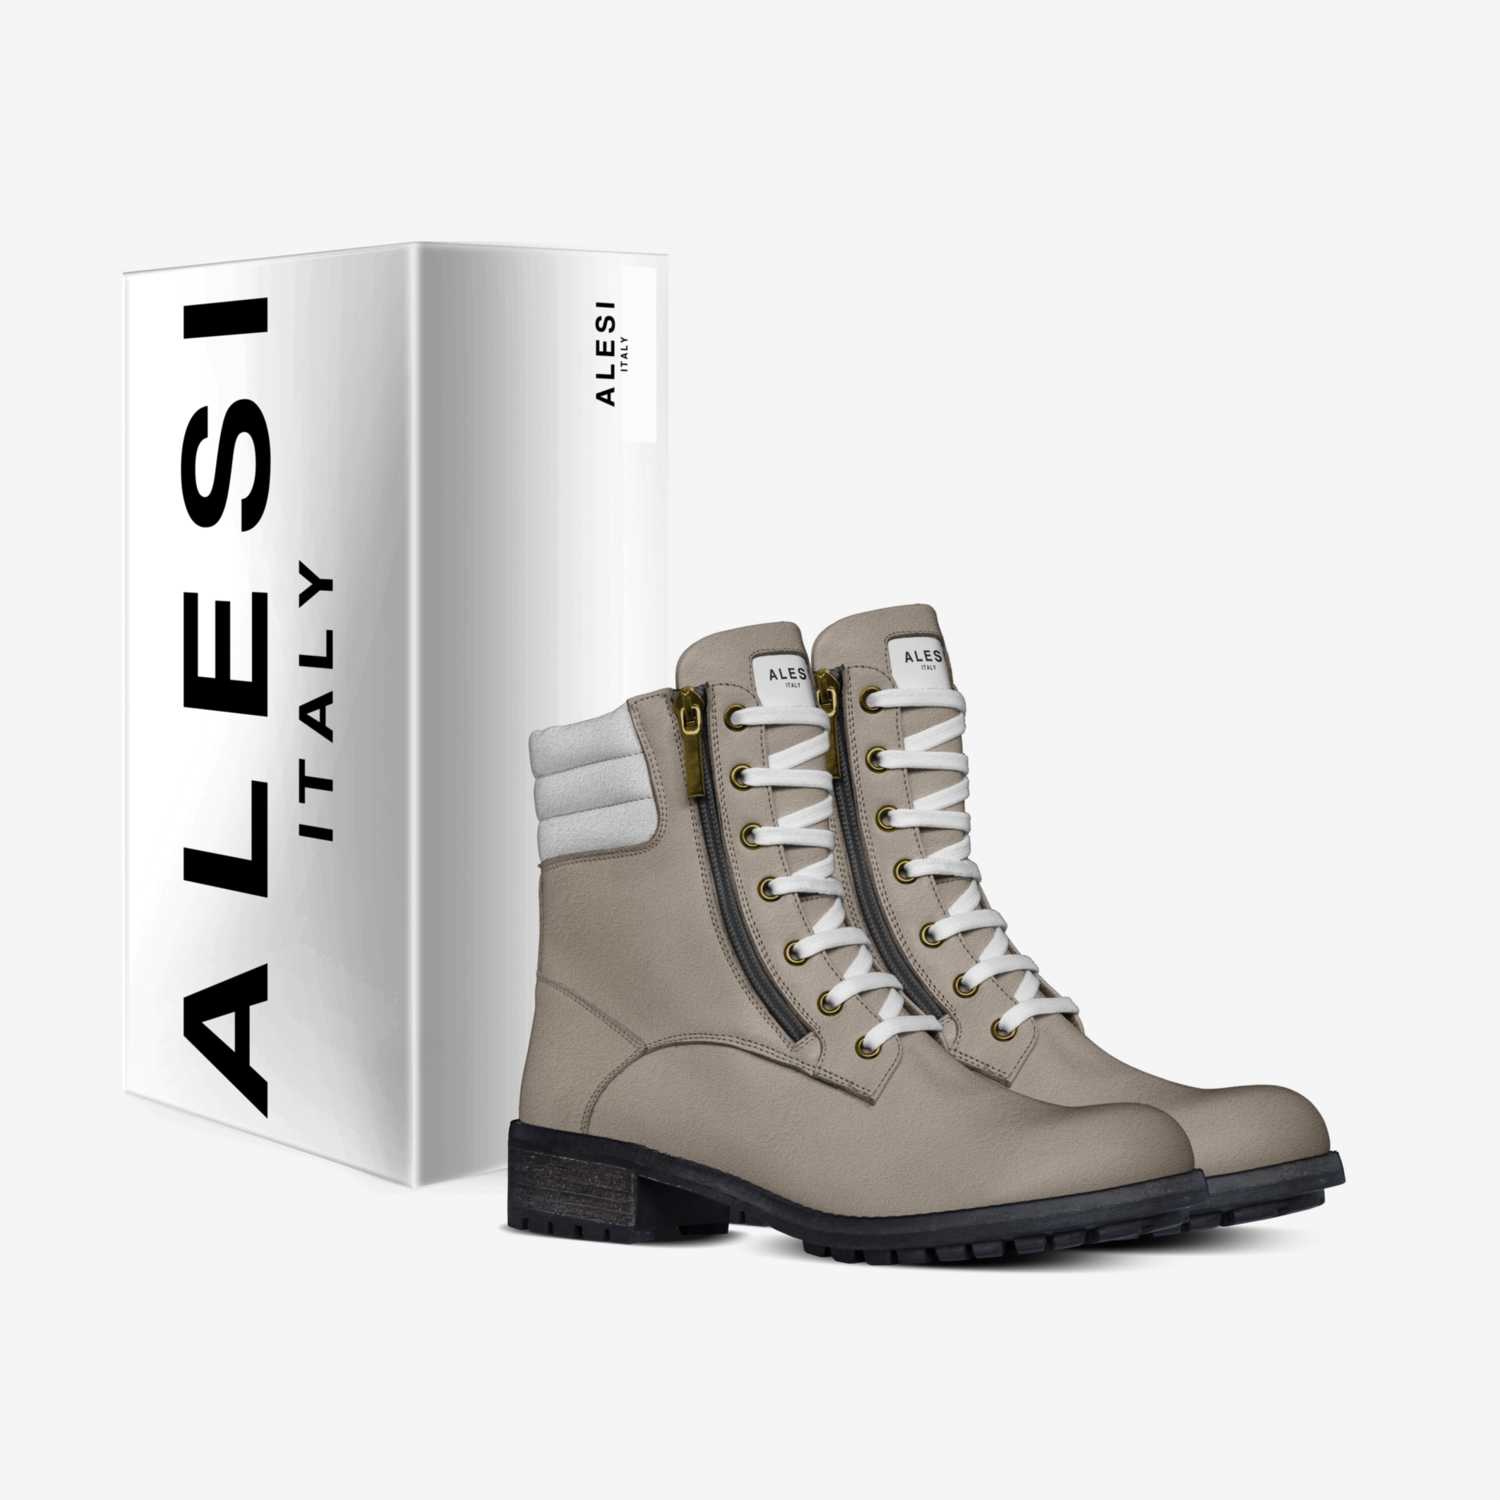 Alesi Lady Boots custom made in Italy shoes by Lonanthony Parker | Box view